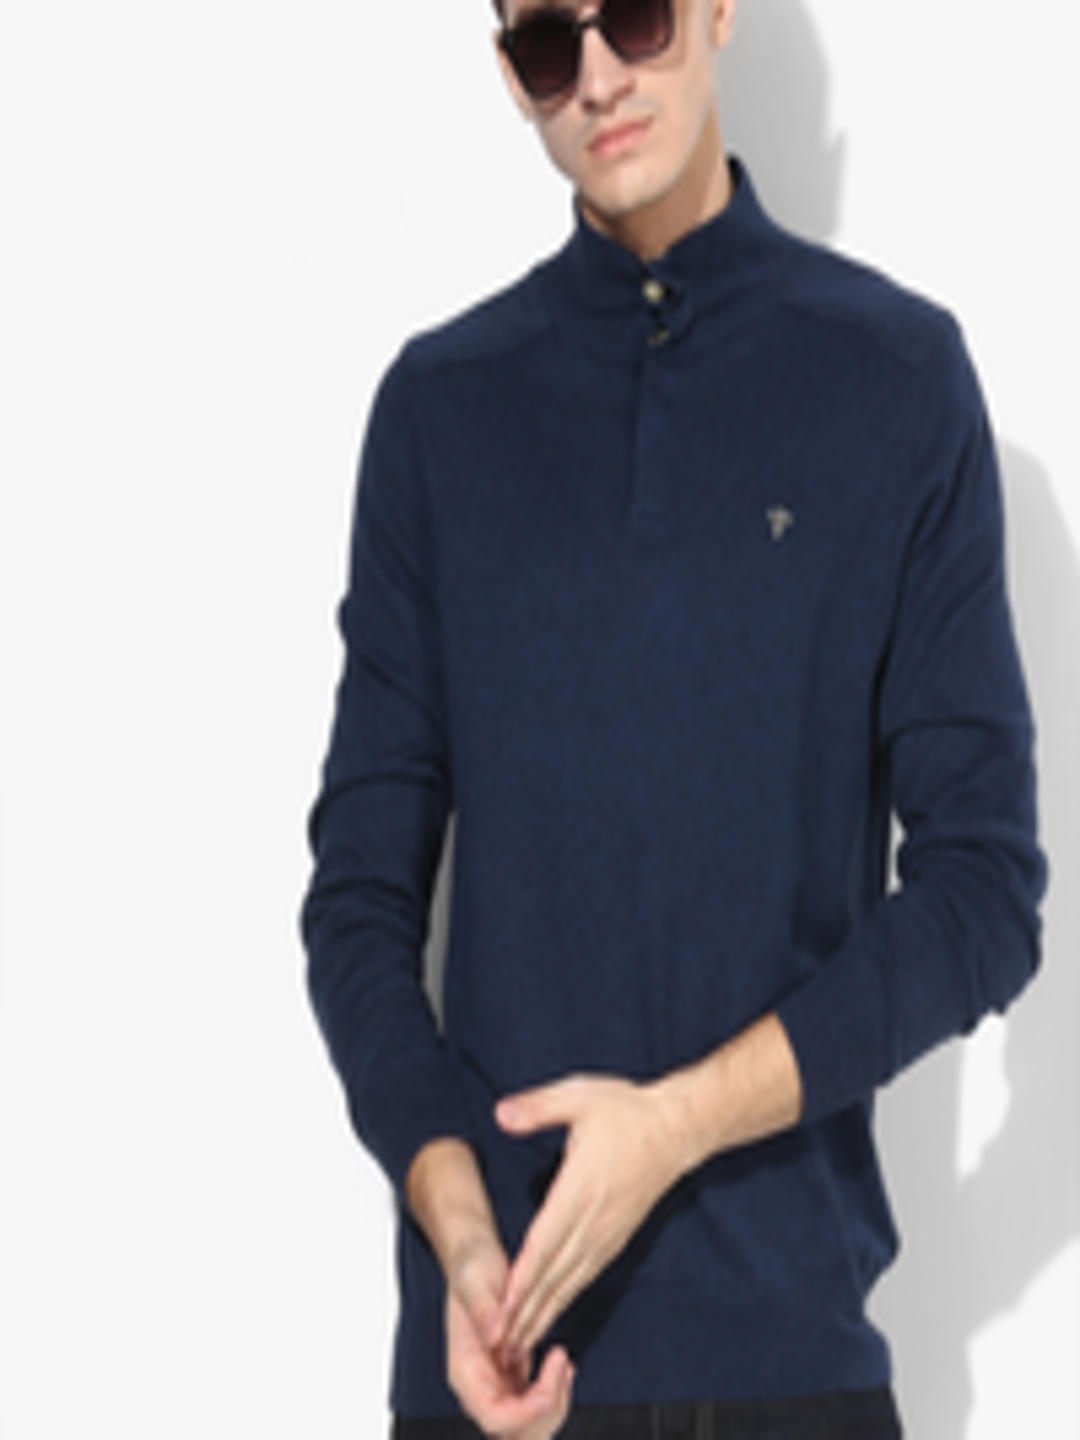 Buy Navy Blue Solid High Neck Sweater - Sweaters for Men 7987931 | Myntra